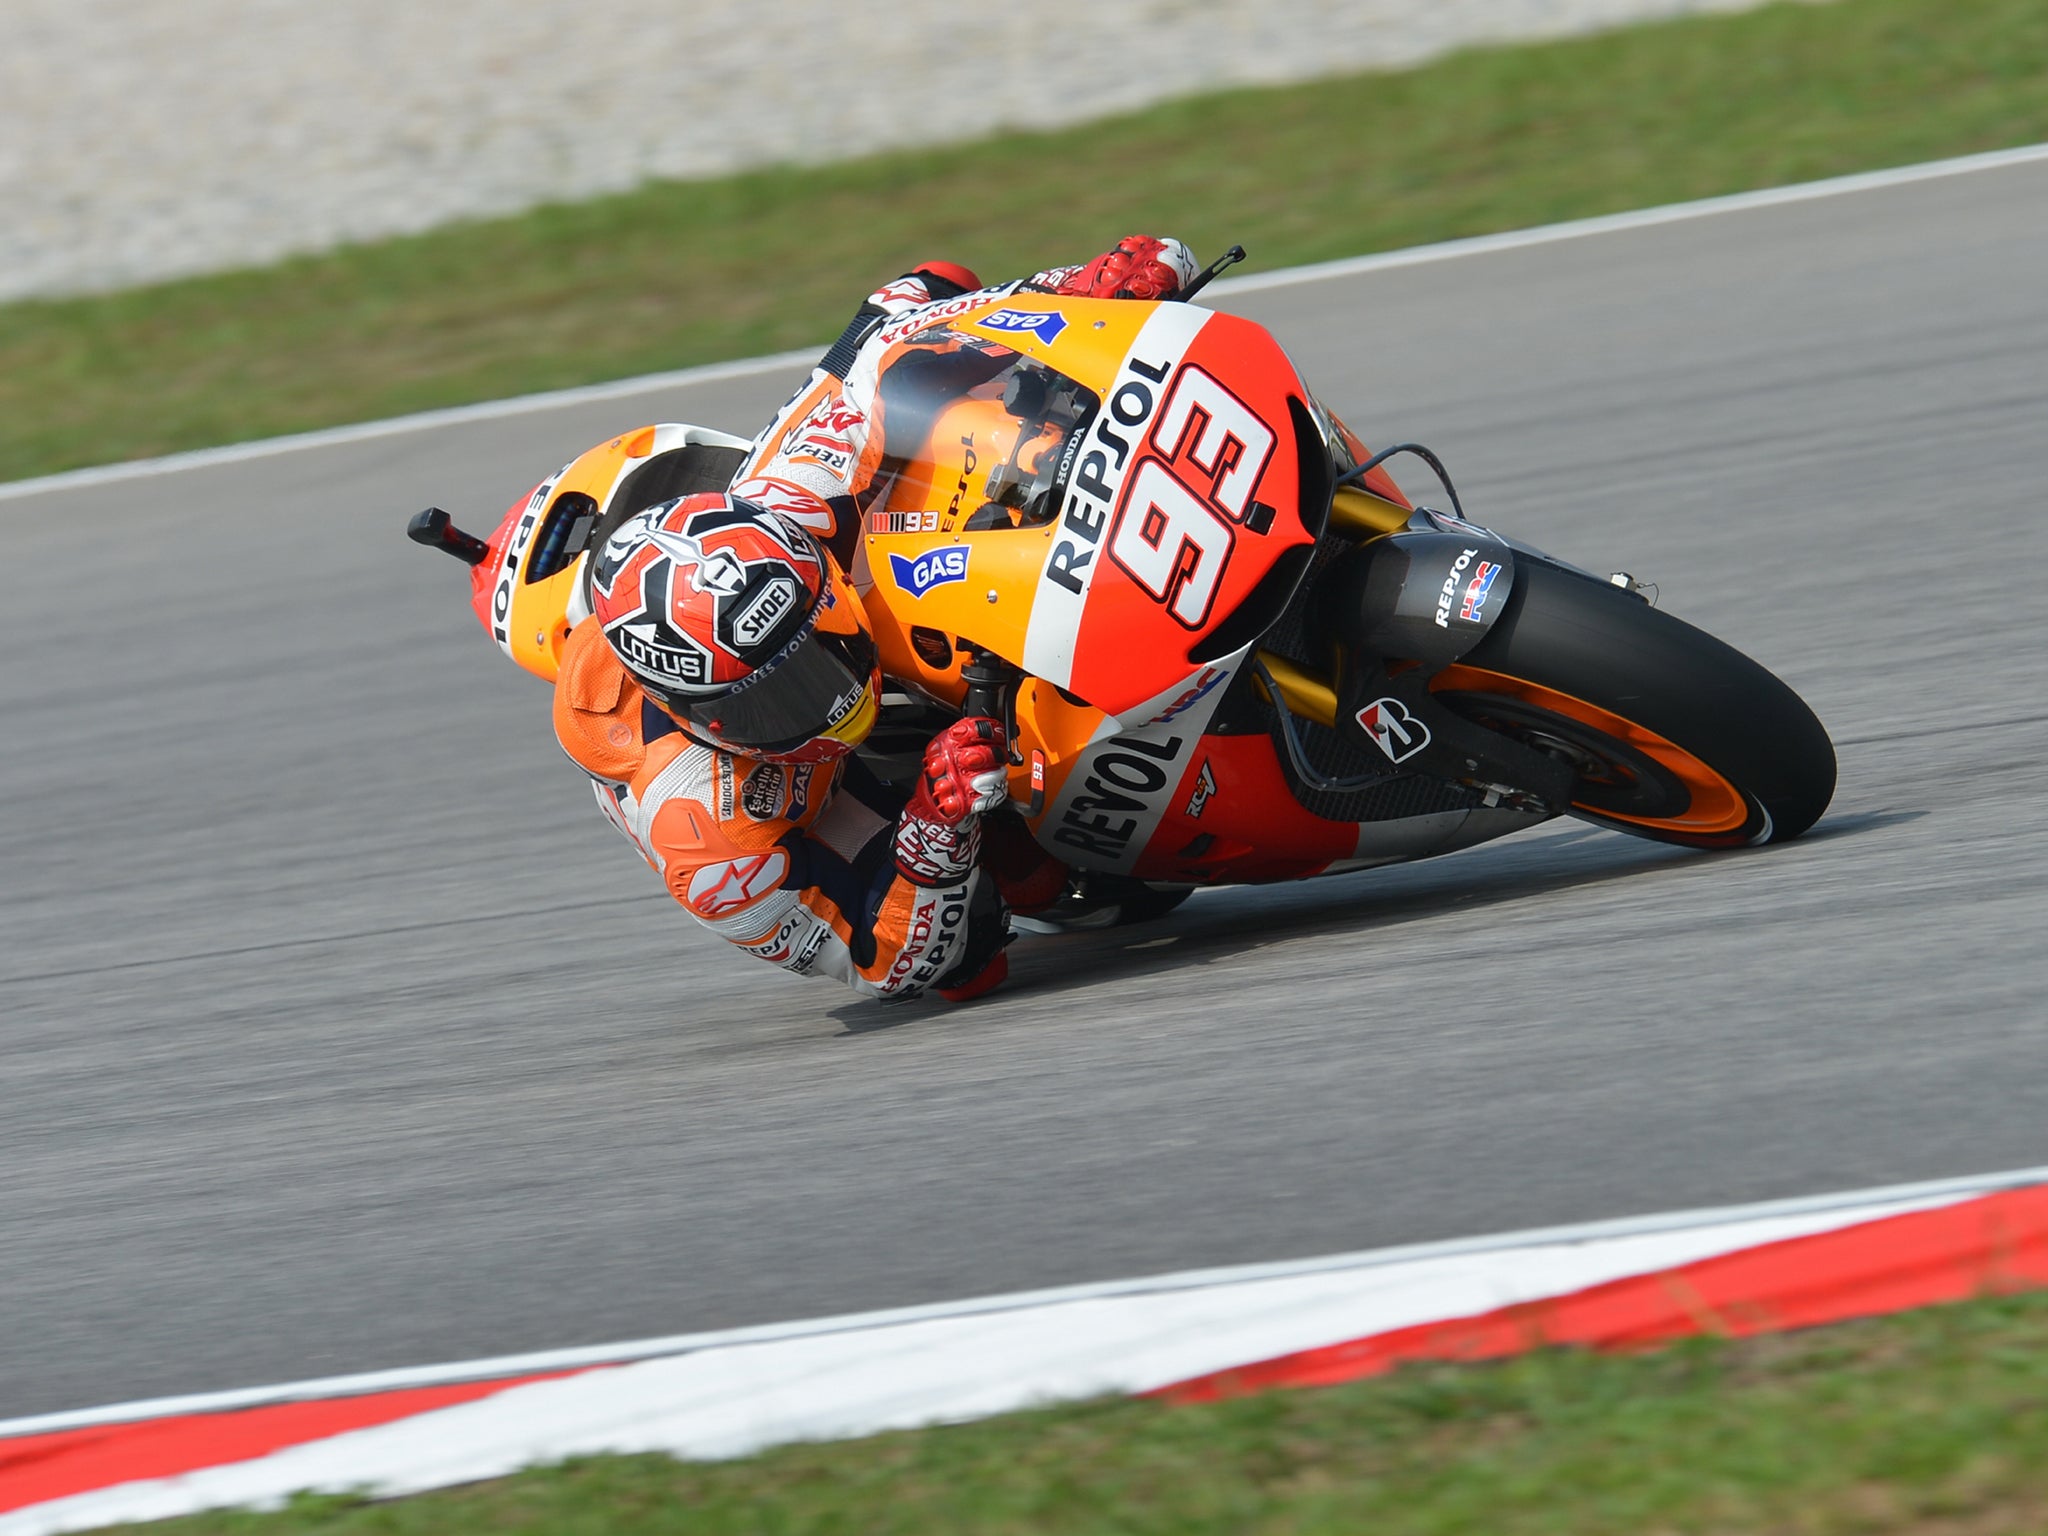 Honda's Marc Marquez will start tomorrow's Malaysian Grand Prix from pole ahead of Valentino Rossi and Cal Crutchlow